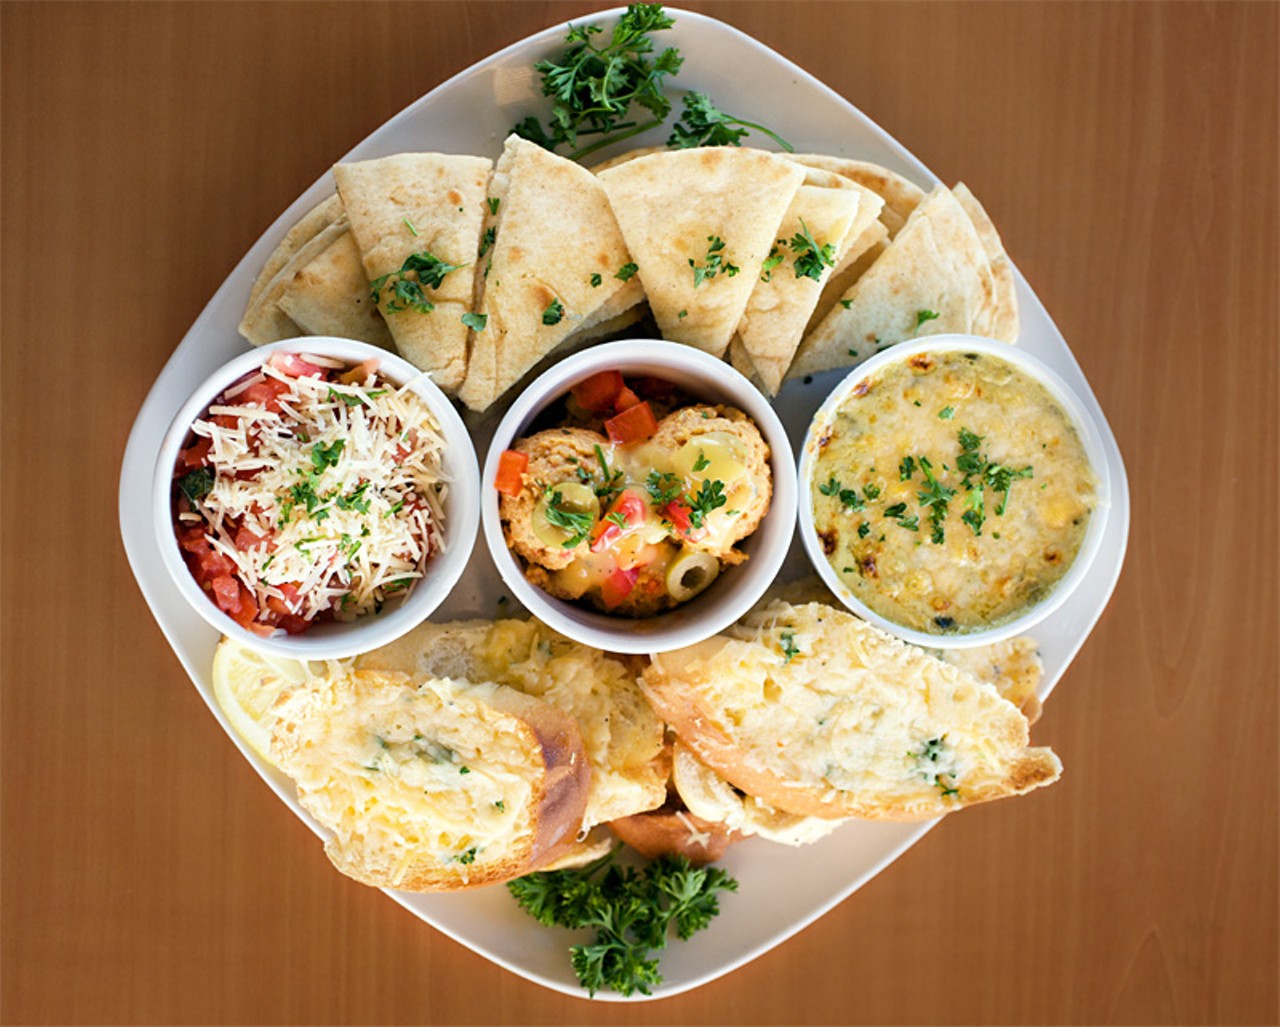 The Dip Trio appetizer is bruschetta, hummus and spinach artichoke dip served with warm pita and crispy crostinis.